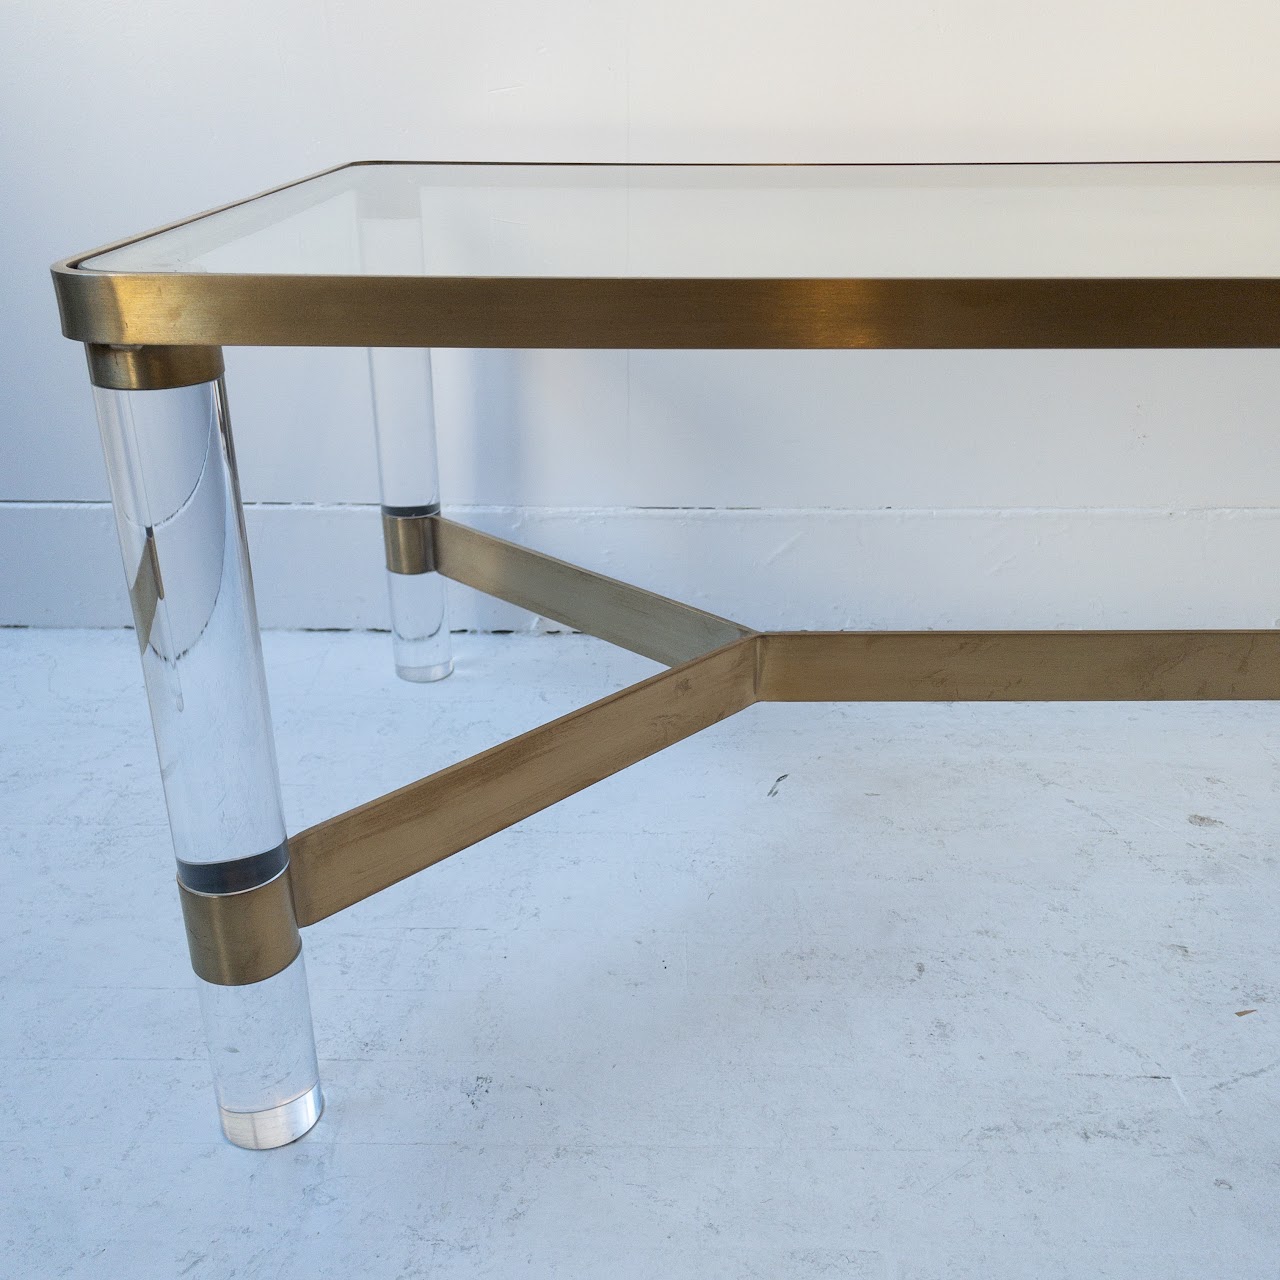 Anthropologie Oscarine Lucite Coffee Table